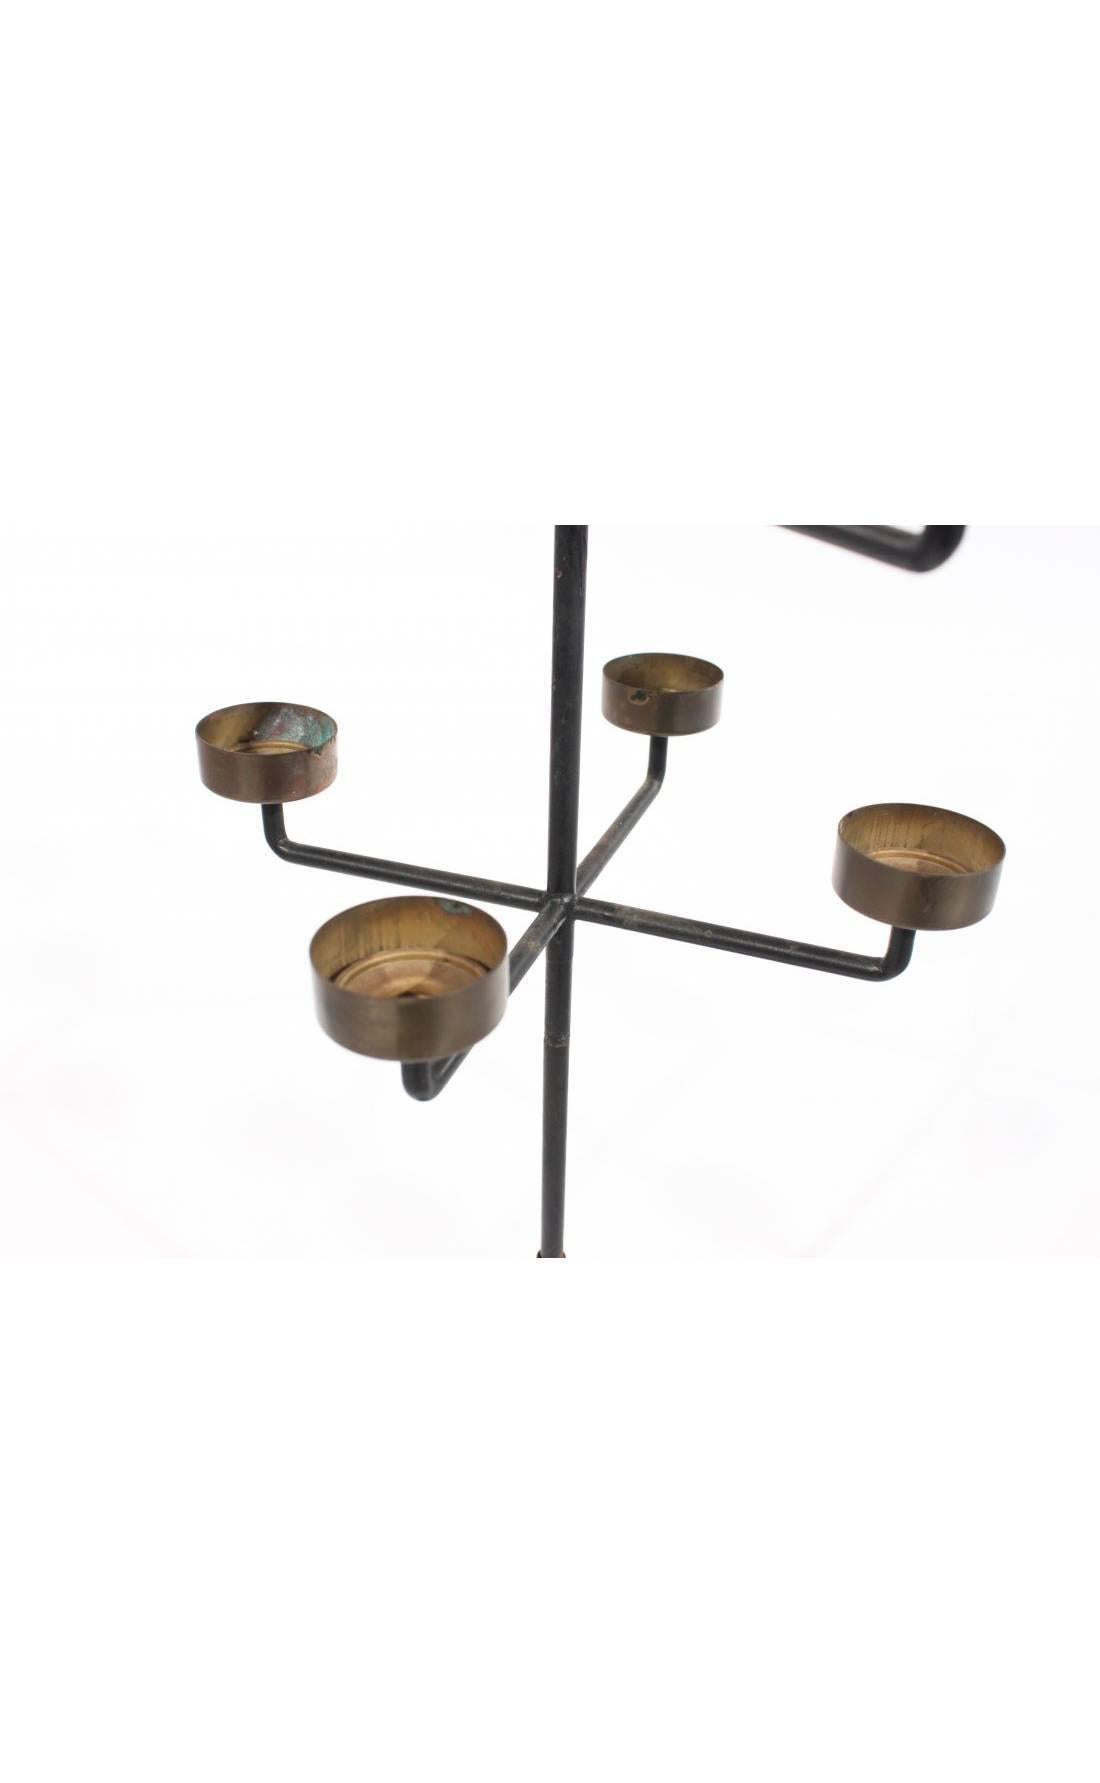 American Pair of Midcentury Iron and Brass Candelabras